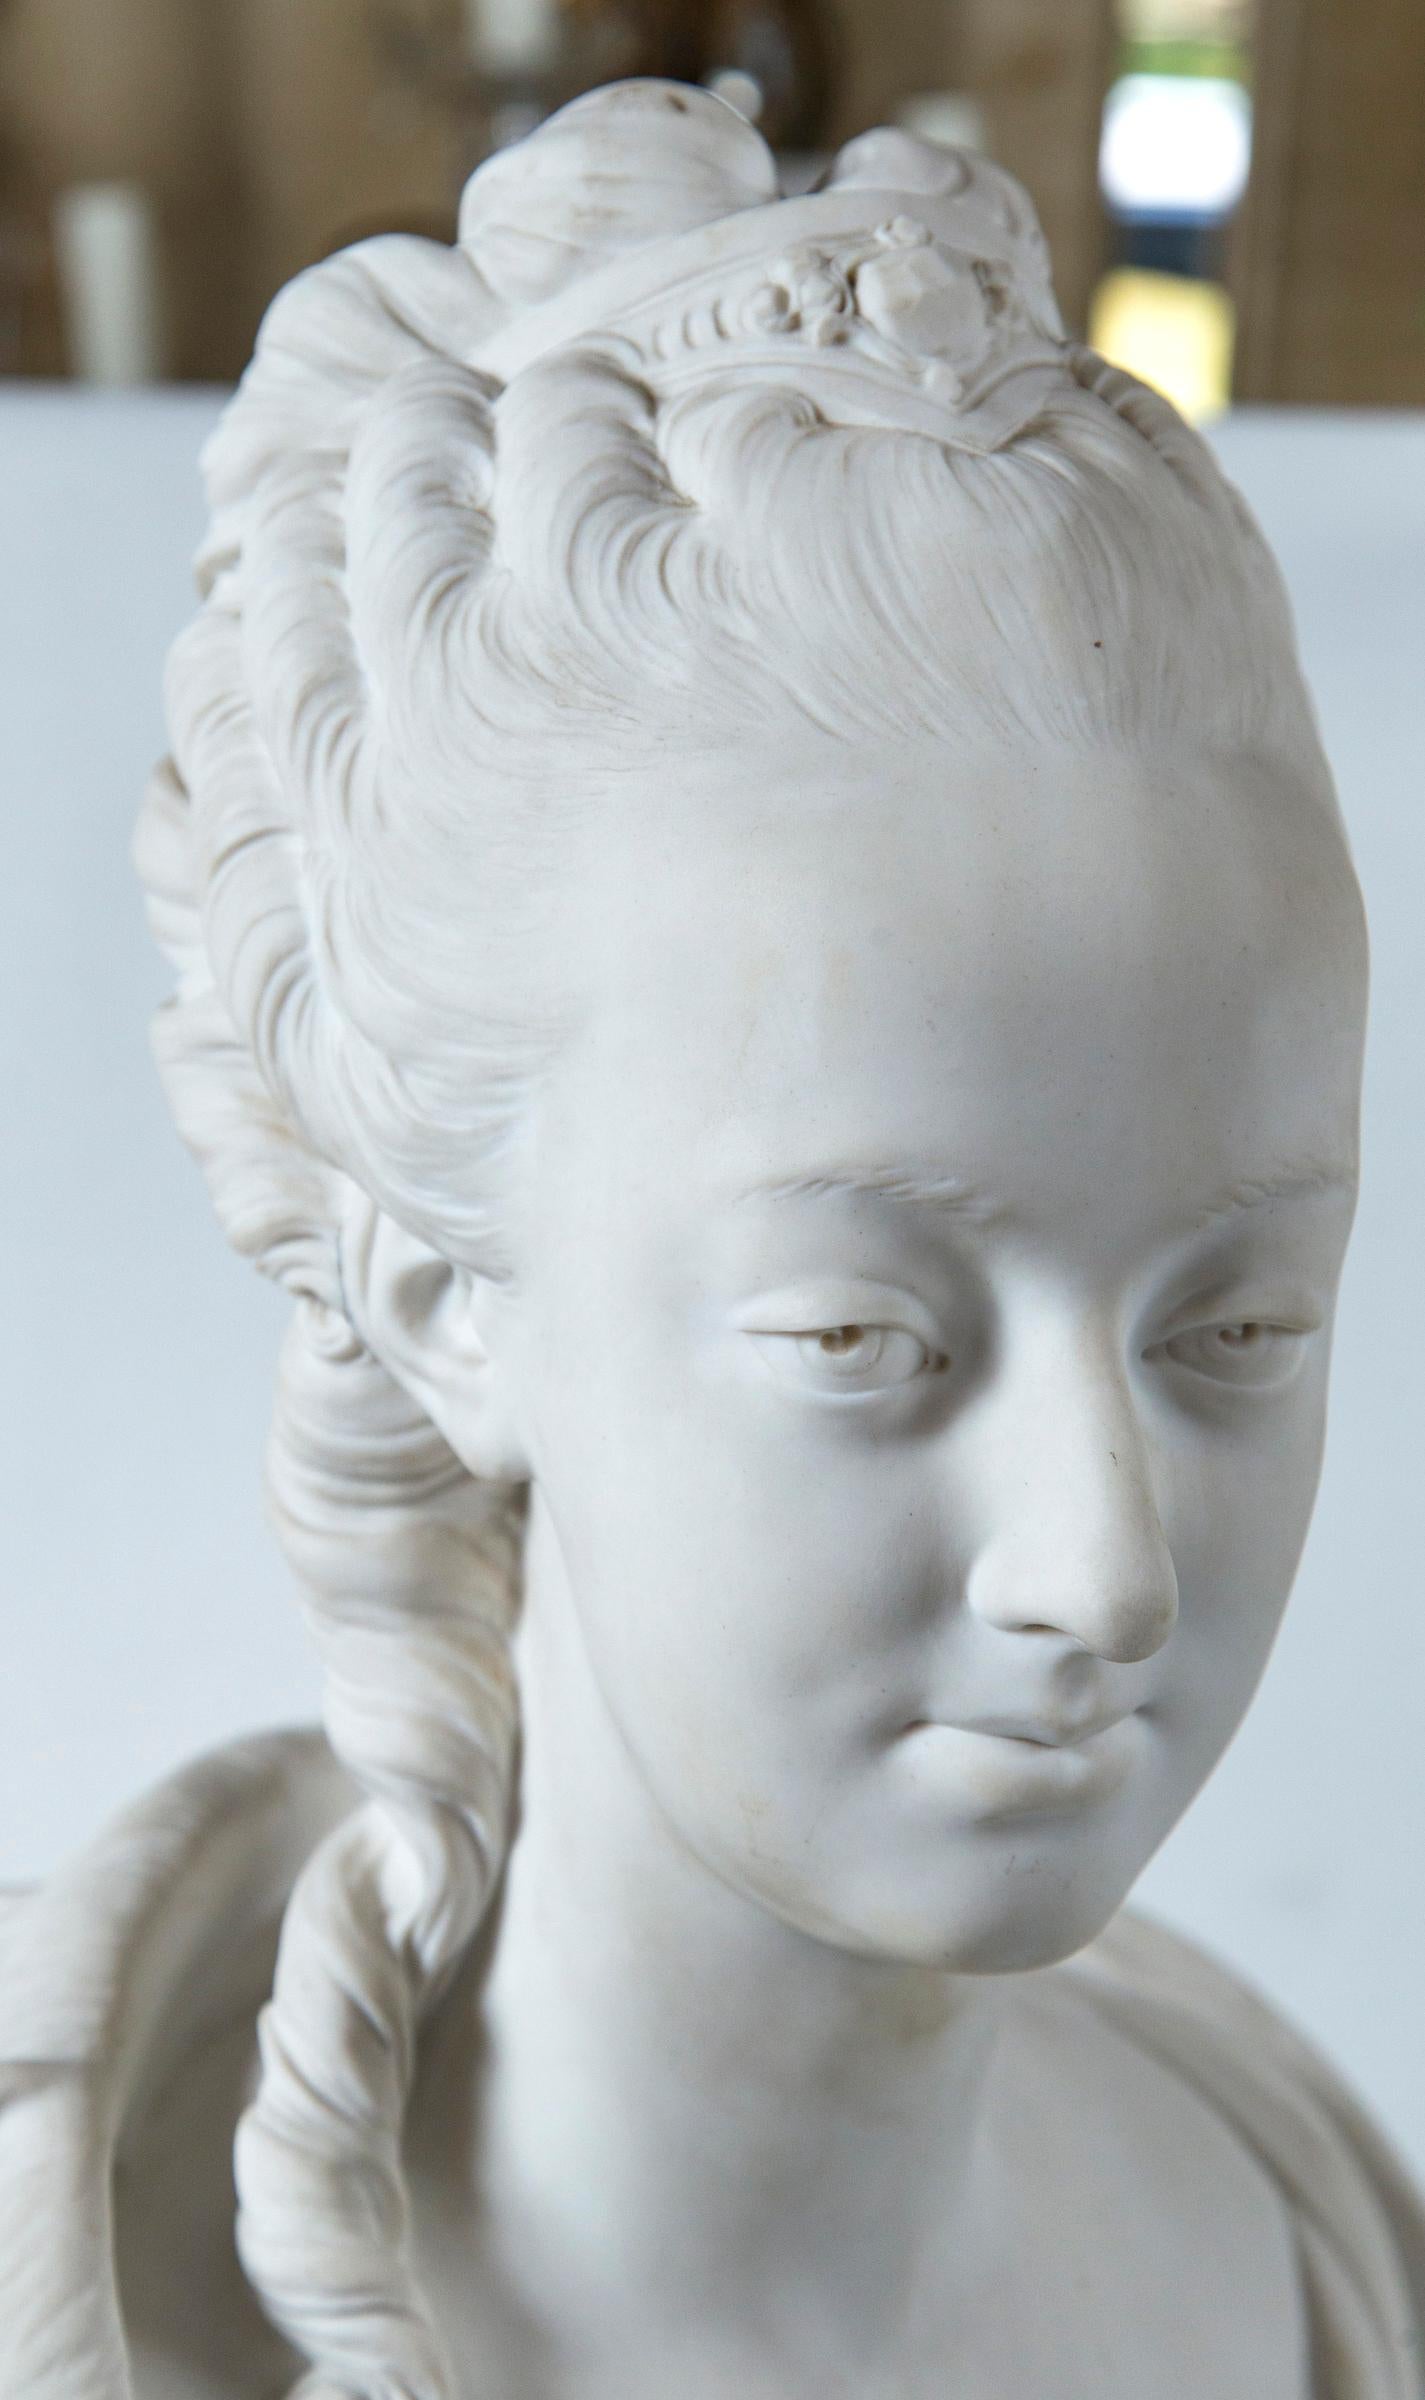 Possibly a bust of Madame du Barry. Signed across the back Pajou. A round seal next to the signature is inscribed Nationale Sevres Manufacture, with letters and number below. There is no Sèvres mark that we can find. She wears a outer garment that